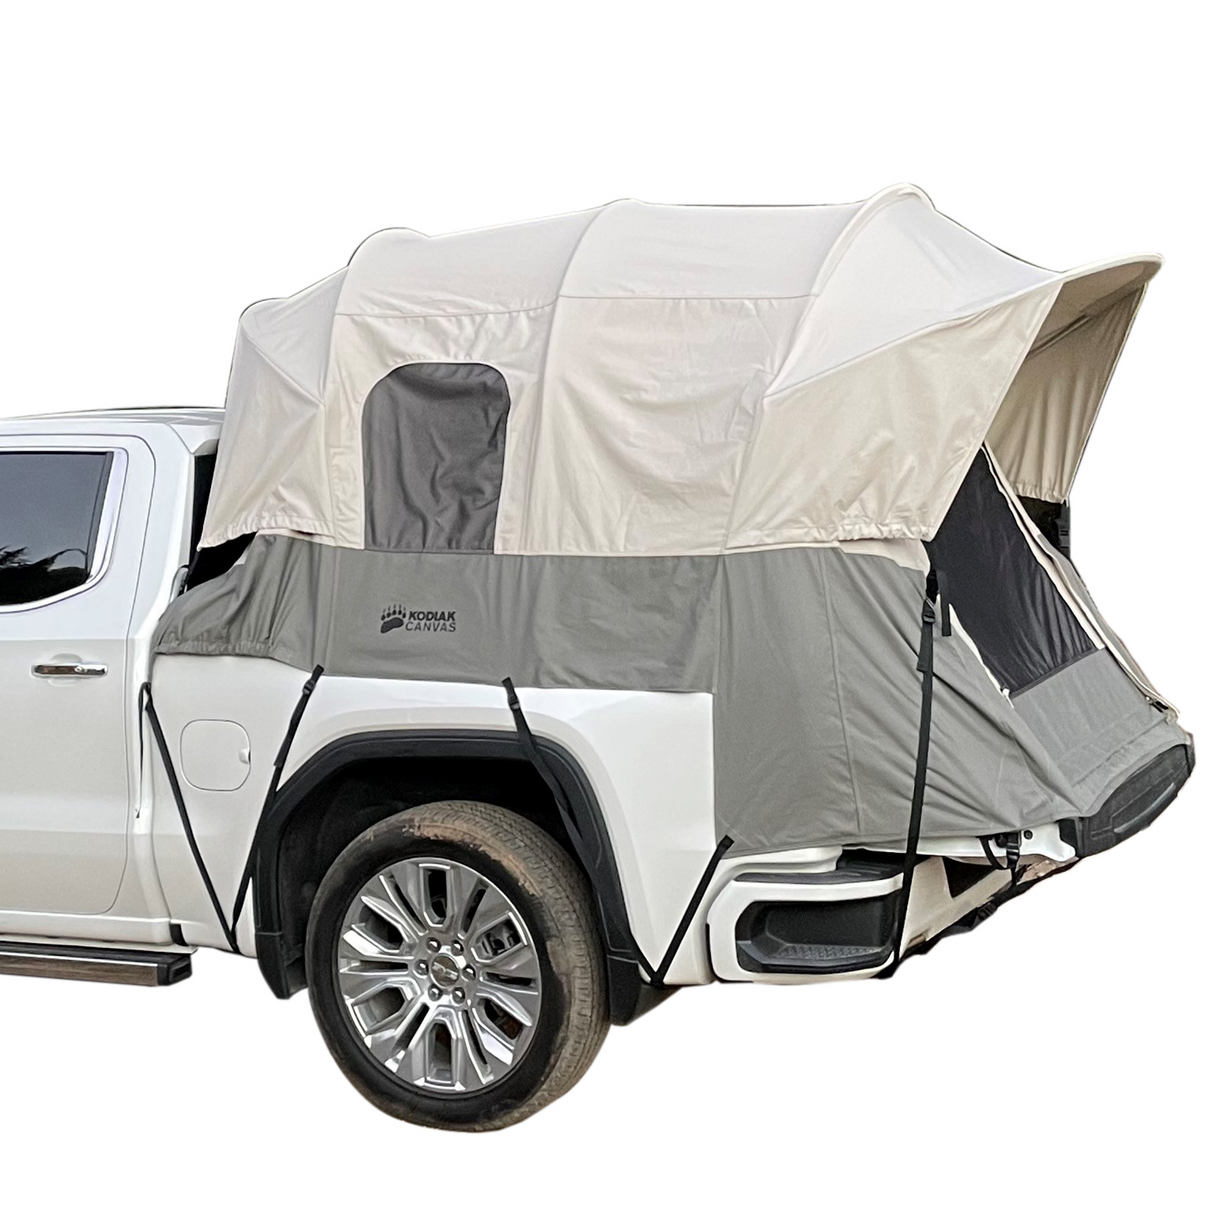 Tent Body Full Sized 6 ft. Truck Tent (Tent Body Only)